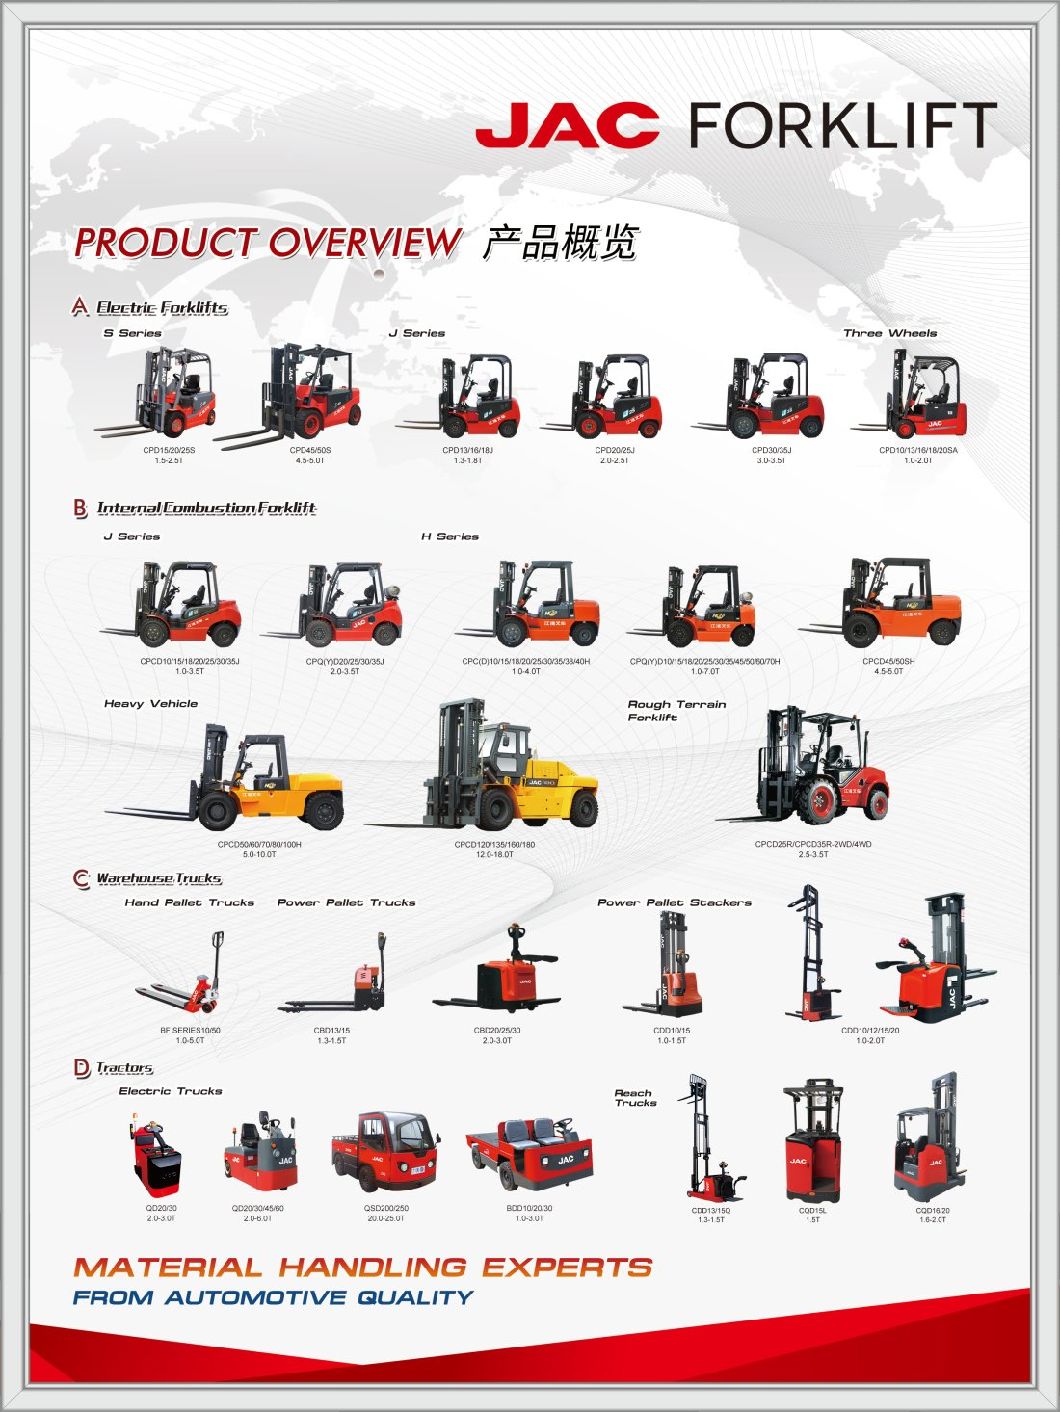 JAC 6 Ton Electric Forklift/Cpd60s/Forklift Trucks/Lithium Battery Forklift /Paper Roll Clamps